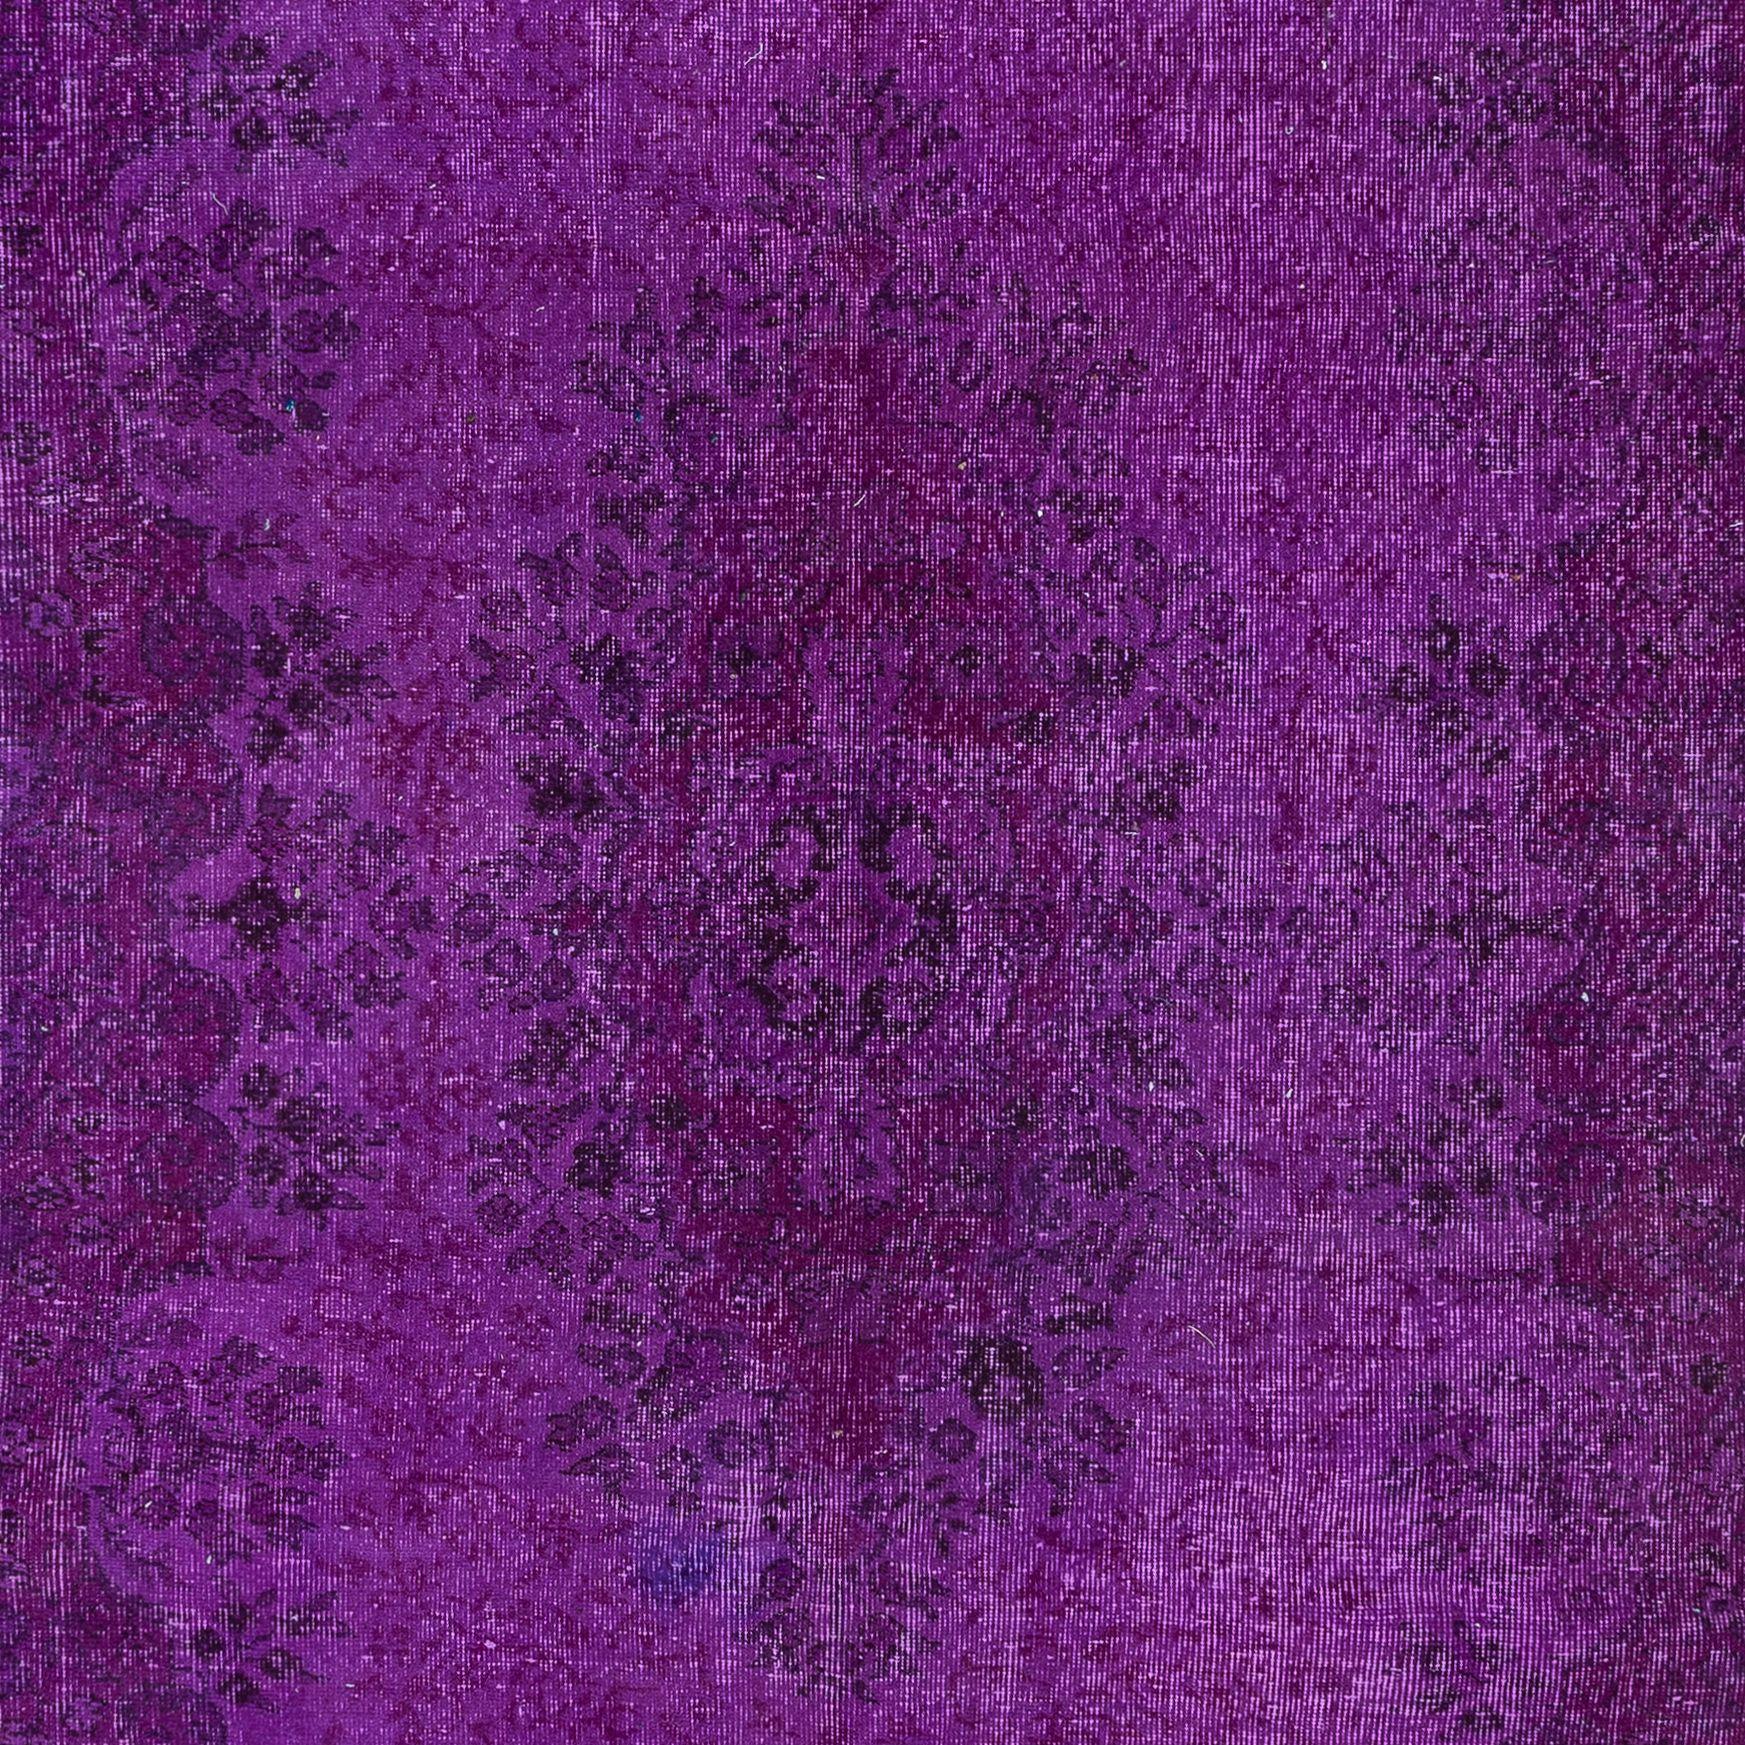 Hand-Knotted 5.8x10 Ft Handmade Turkish Rug in Purple for Bedroom, Modern Living Room Carpet For Sale